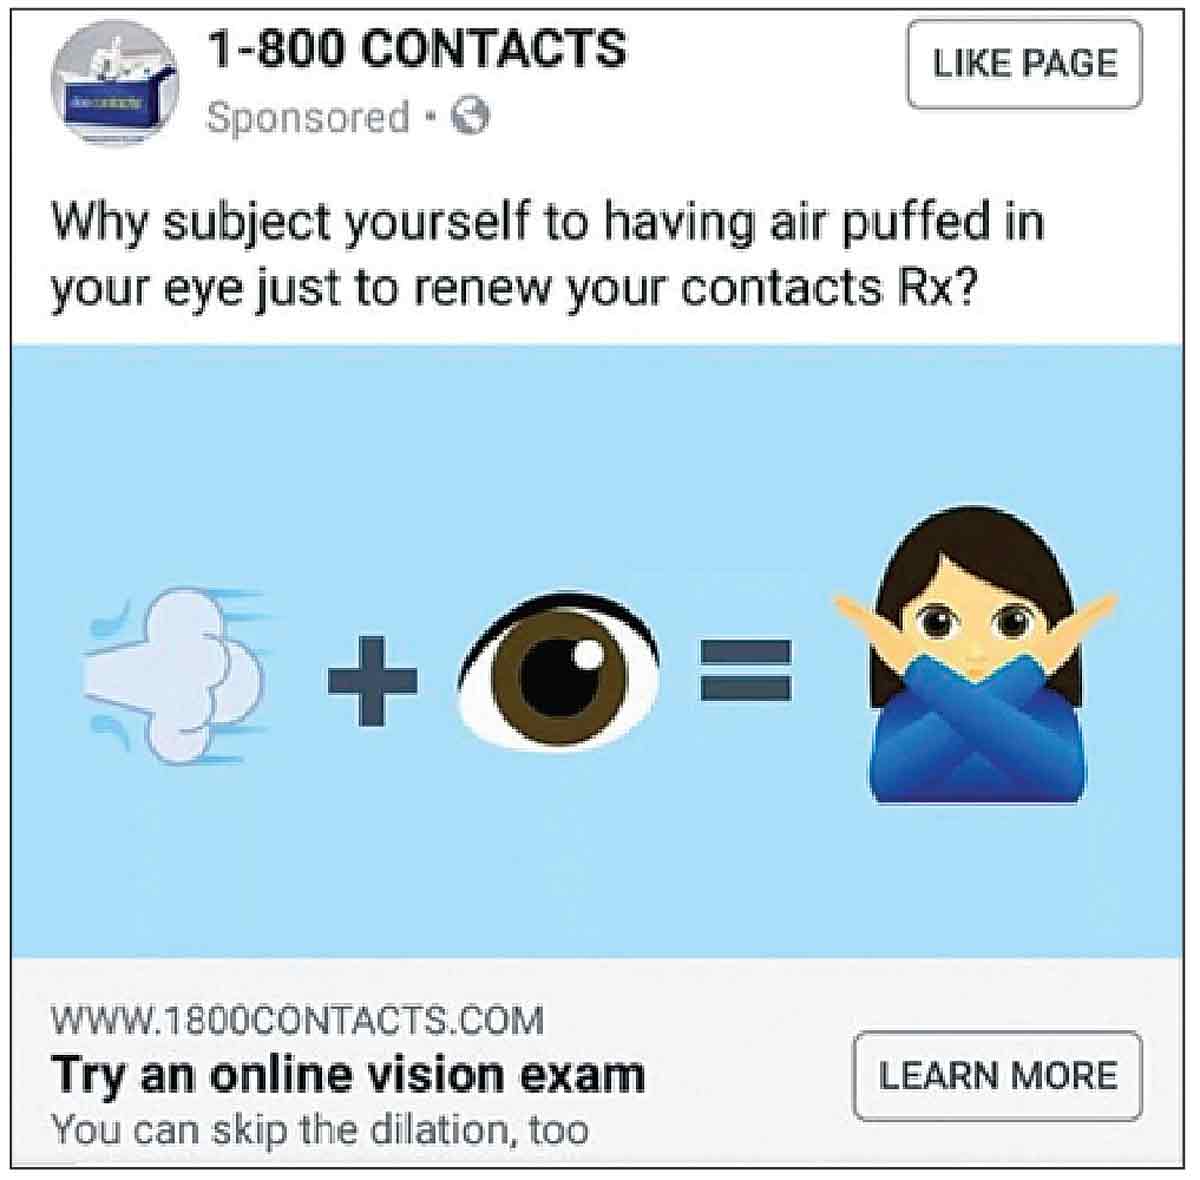 This is an example of a Facebook advertisement used by 1-800 CONTACTS to promote the company’s online contact lens prescription renewal platform.